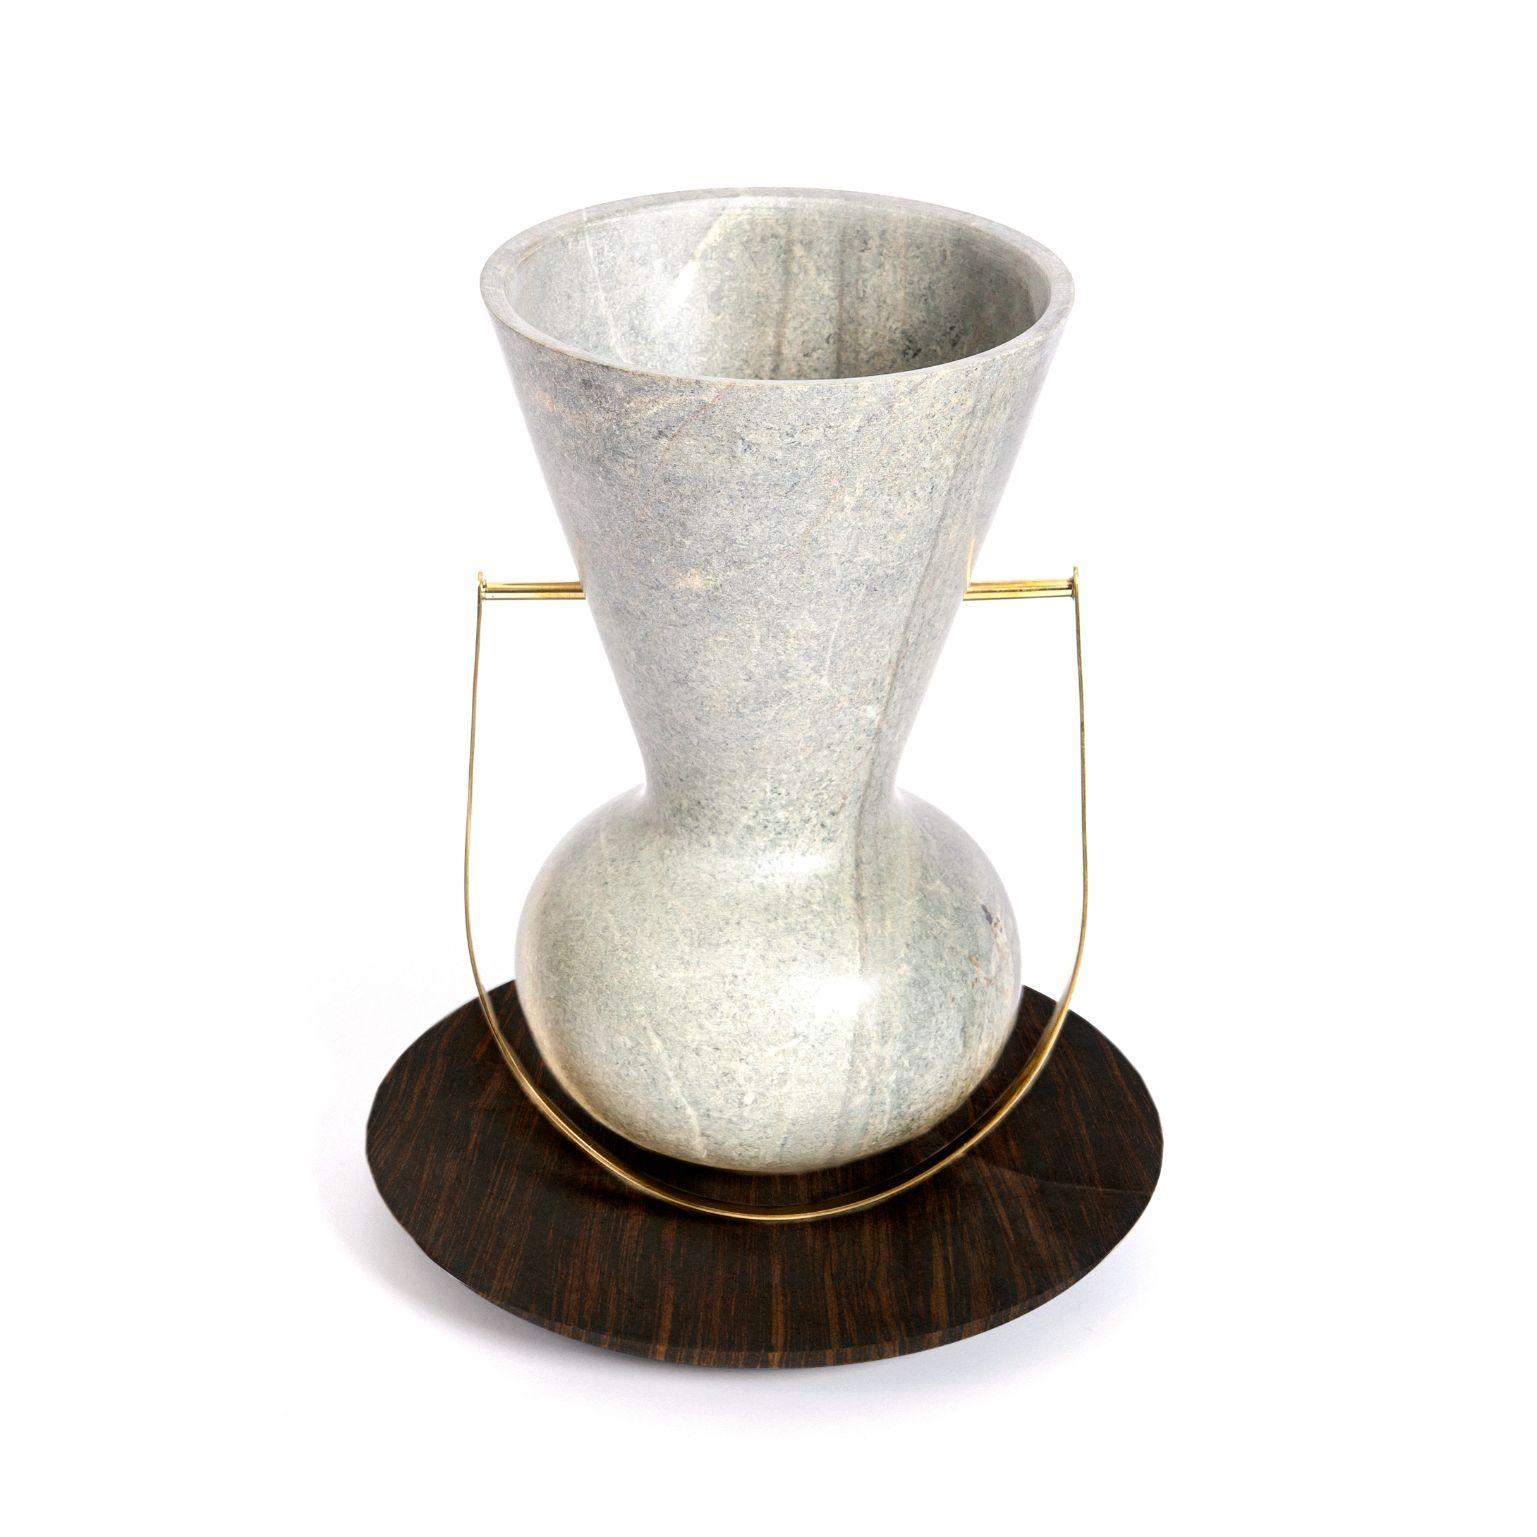 Ita 2 - soapstone vase by Alva Design
Materials: Soapstone, brass
Dimensions: 25 (Ø) x 32 (H)

Alva is a furniture and objects design office, formed by brothers Susana Bastos, artist and designer, and Marcelo Alvarenga, architect. Their projects